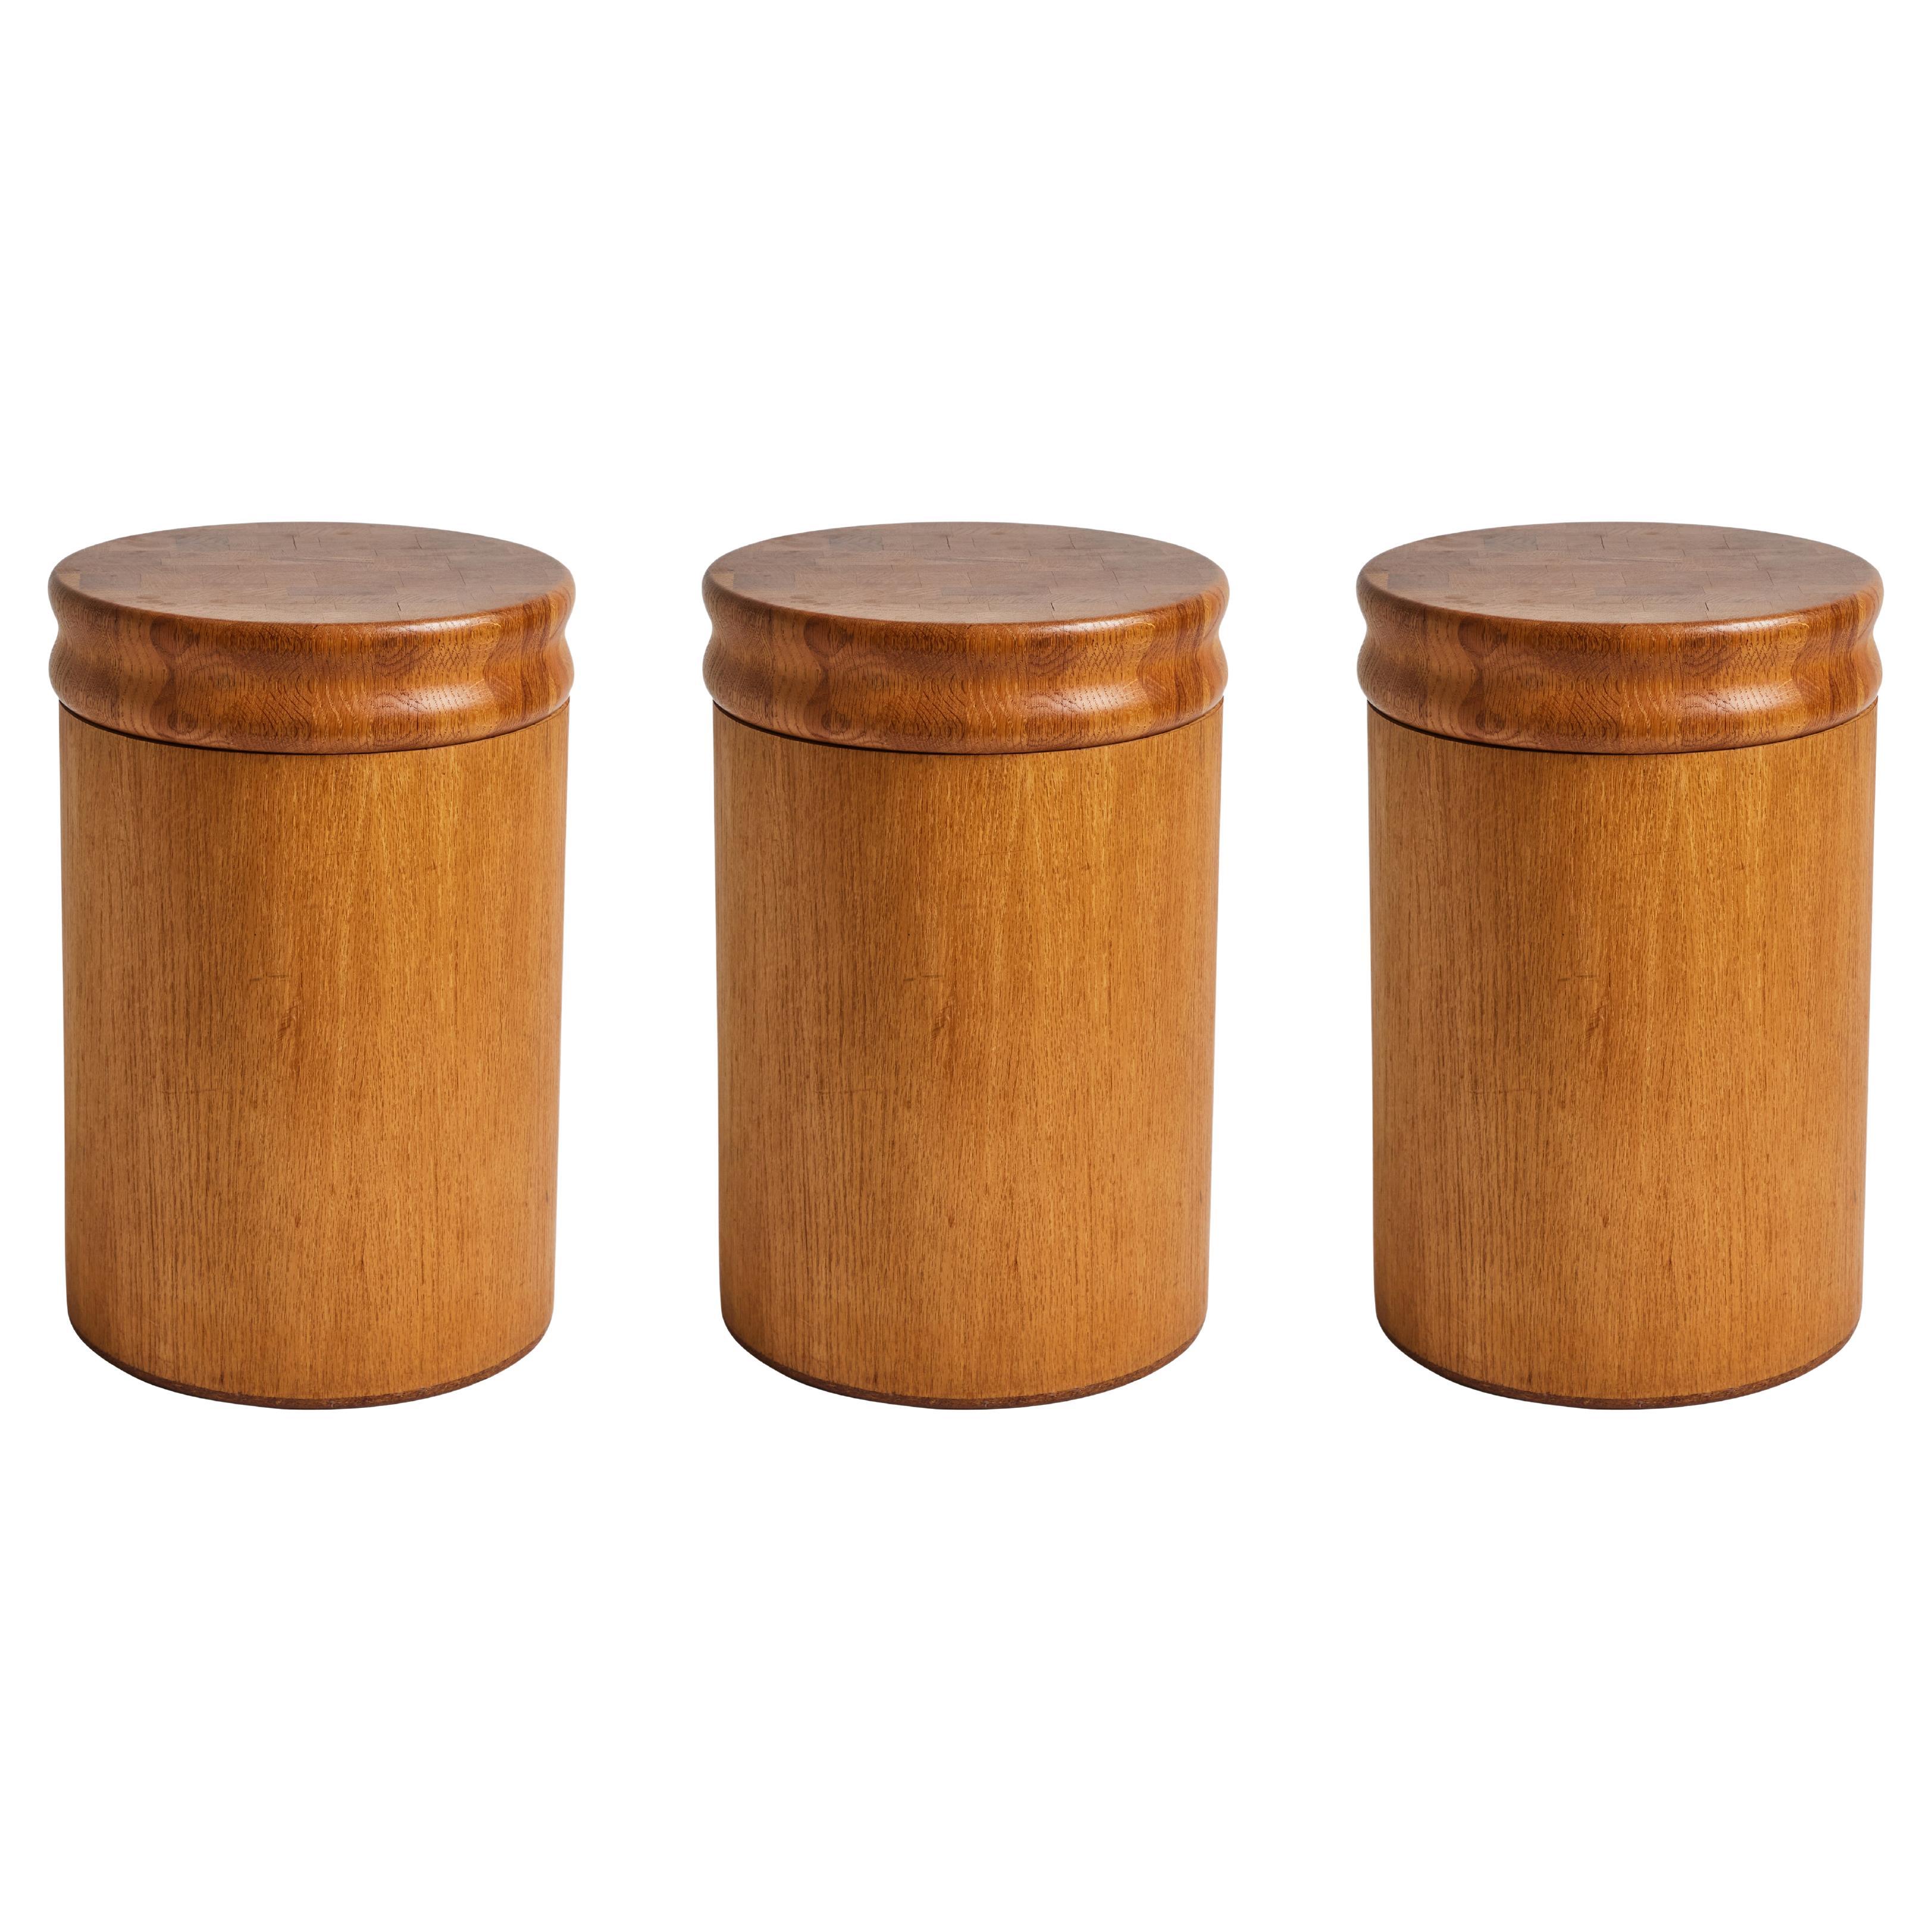 Set of 3 1960s California Handcrafted Wood Storage Side Tables